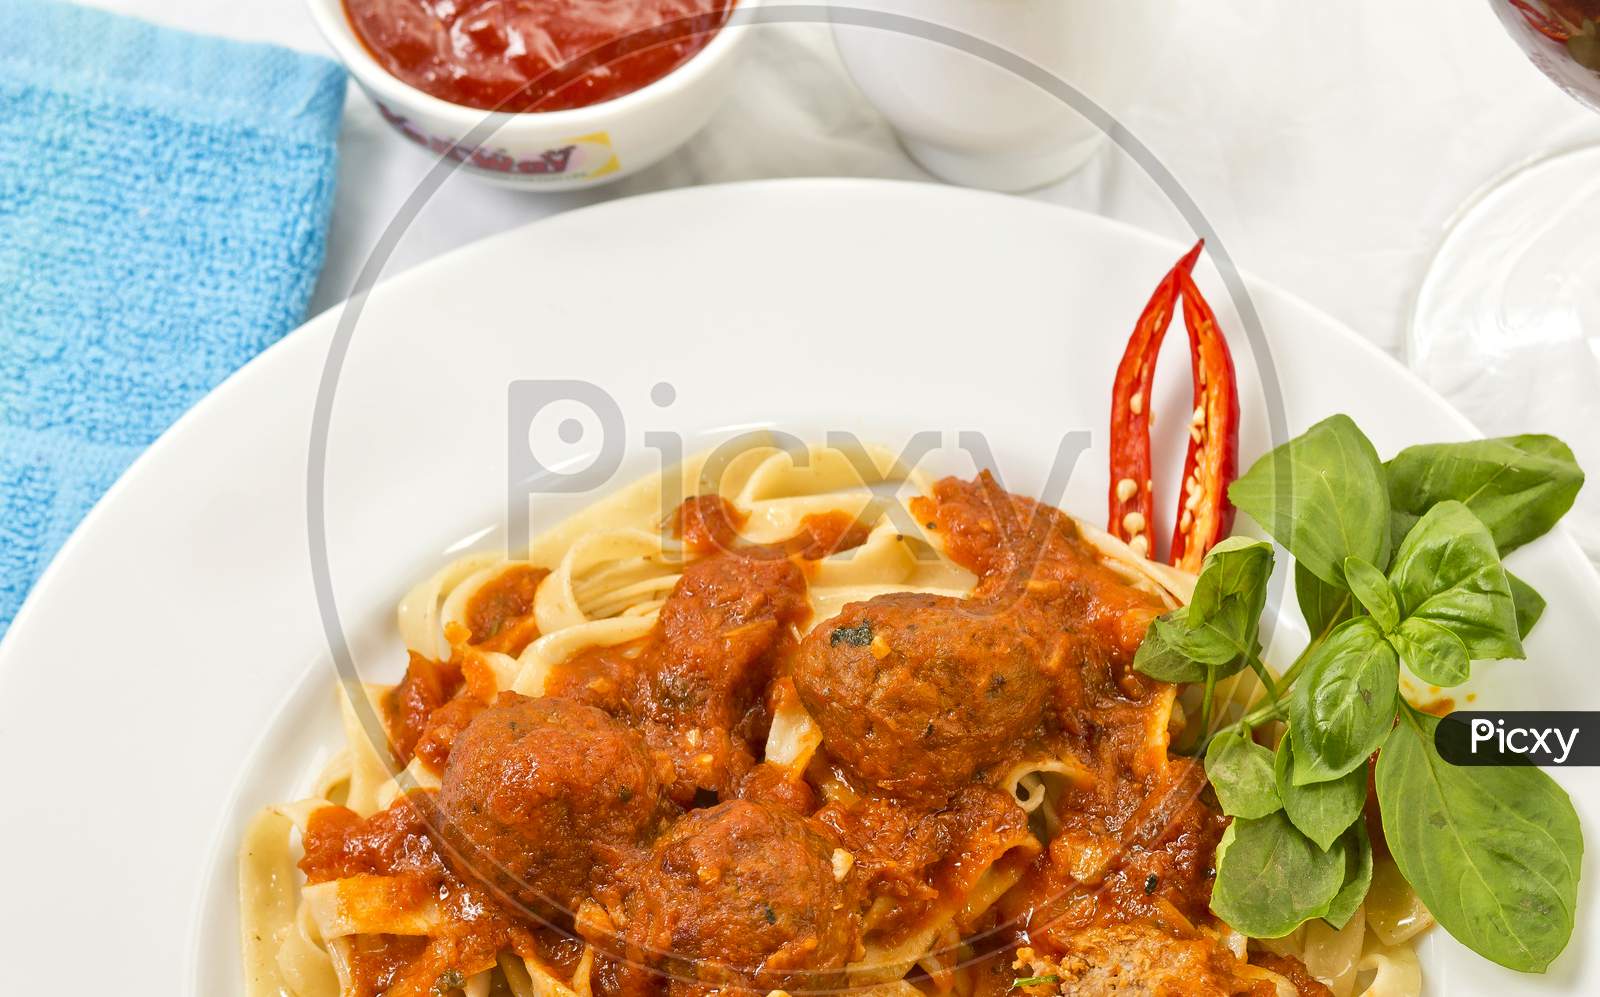 A Plate Of Fettuccine And Meatballs Pasta With Tomato Sauce.